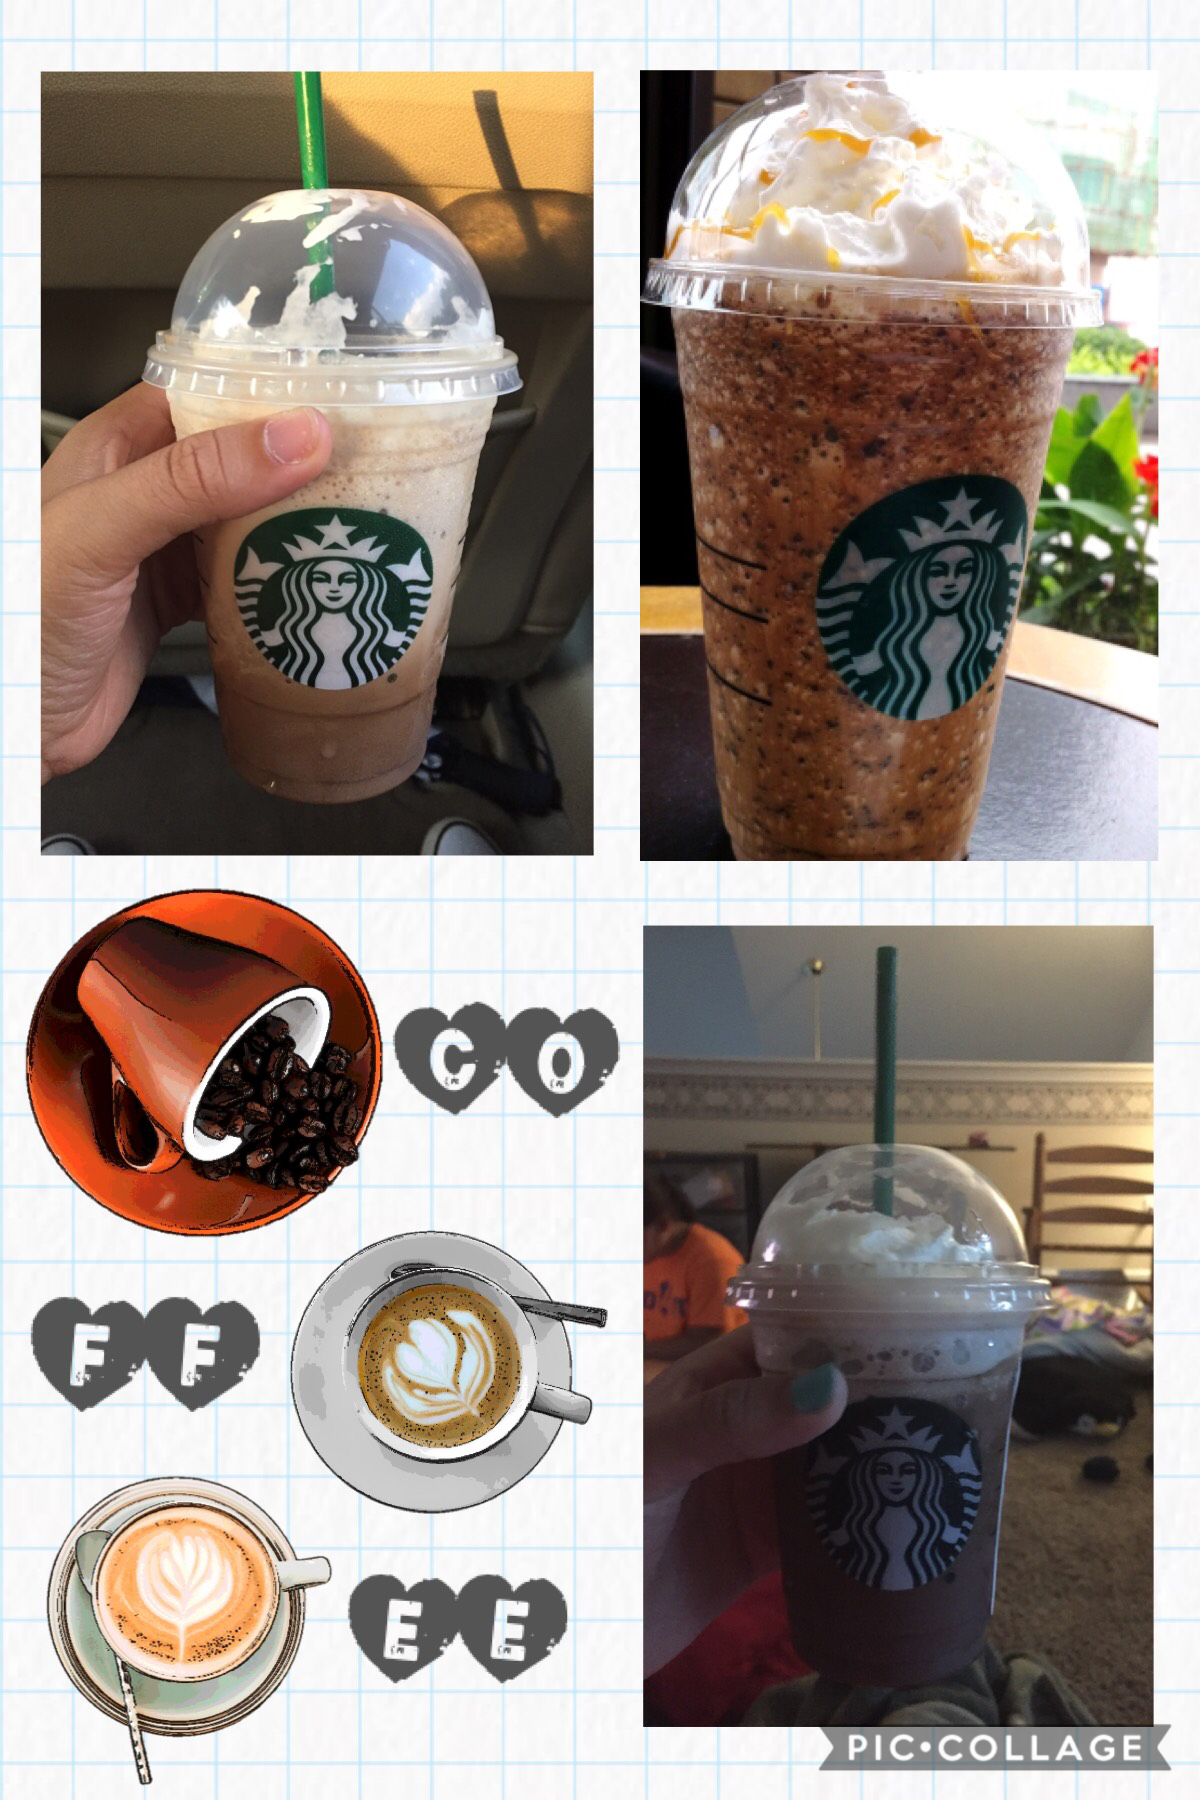 These are all pictures I took👌🏽Tap👌🏽

Upper left: Mocha Frappicino with Raspberry syrup
Upper Right: Vanilla Frappicino with chocolate syrup and peanut butter syrup🥜🍫
Bottom: Coffee Frappicino with Raspberry syrup☕️